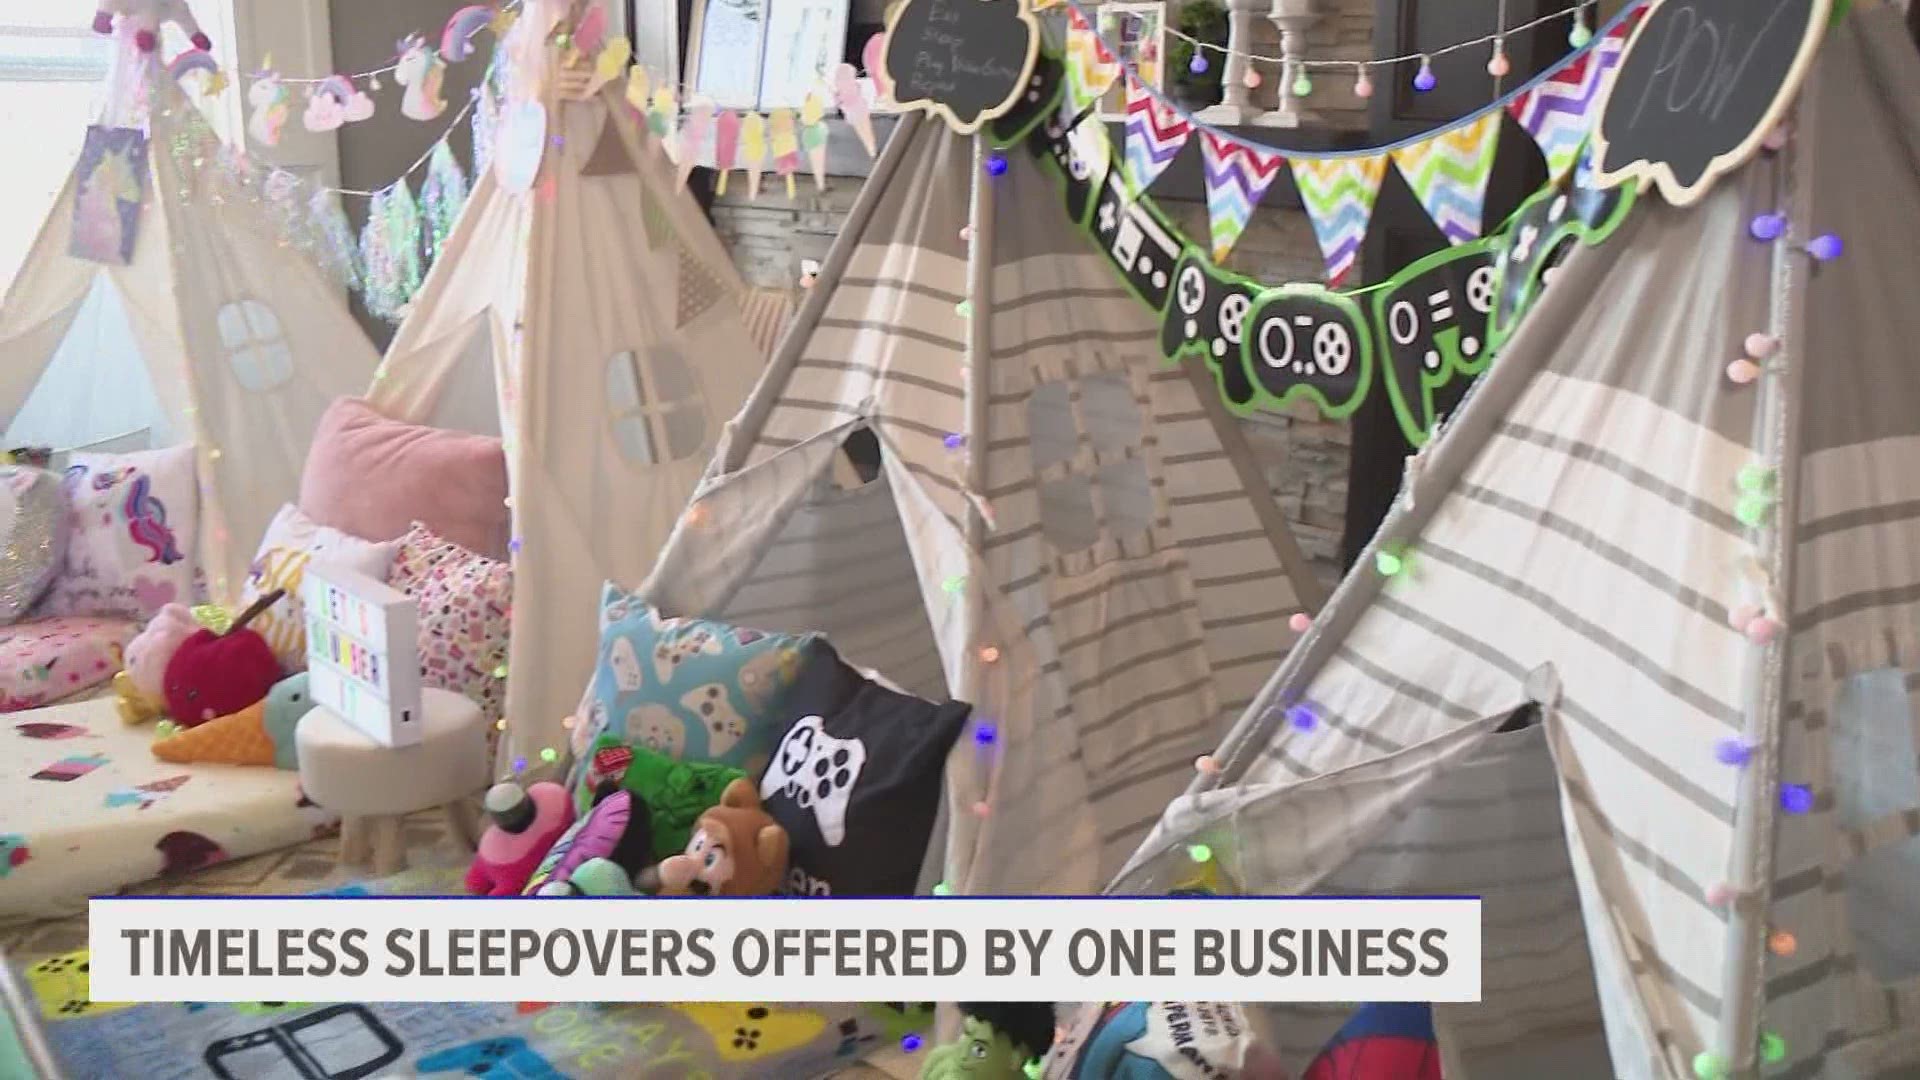 Let's Slumber It specializes in personalized themed sleepover parties for everyone. The best part? They set it up and tear it down for you.